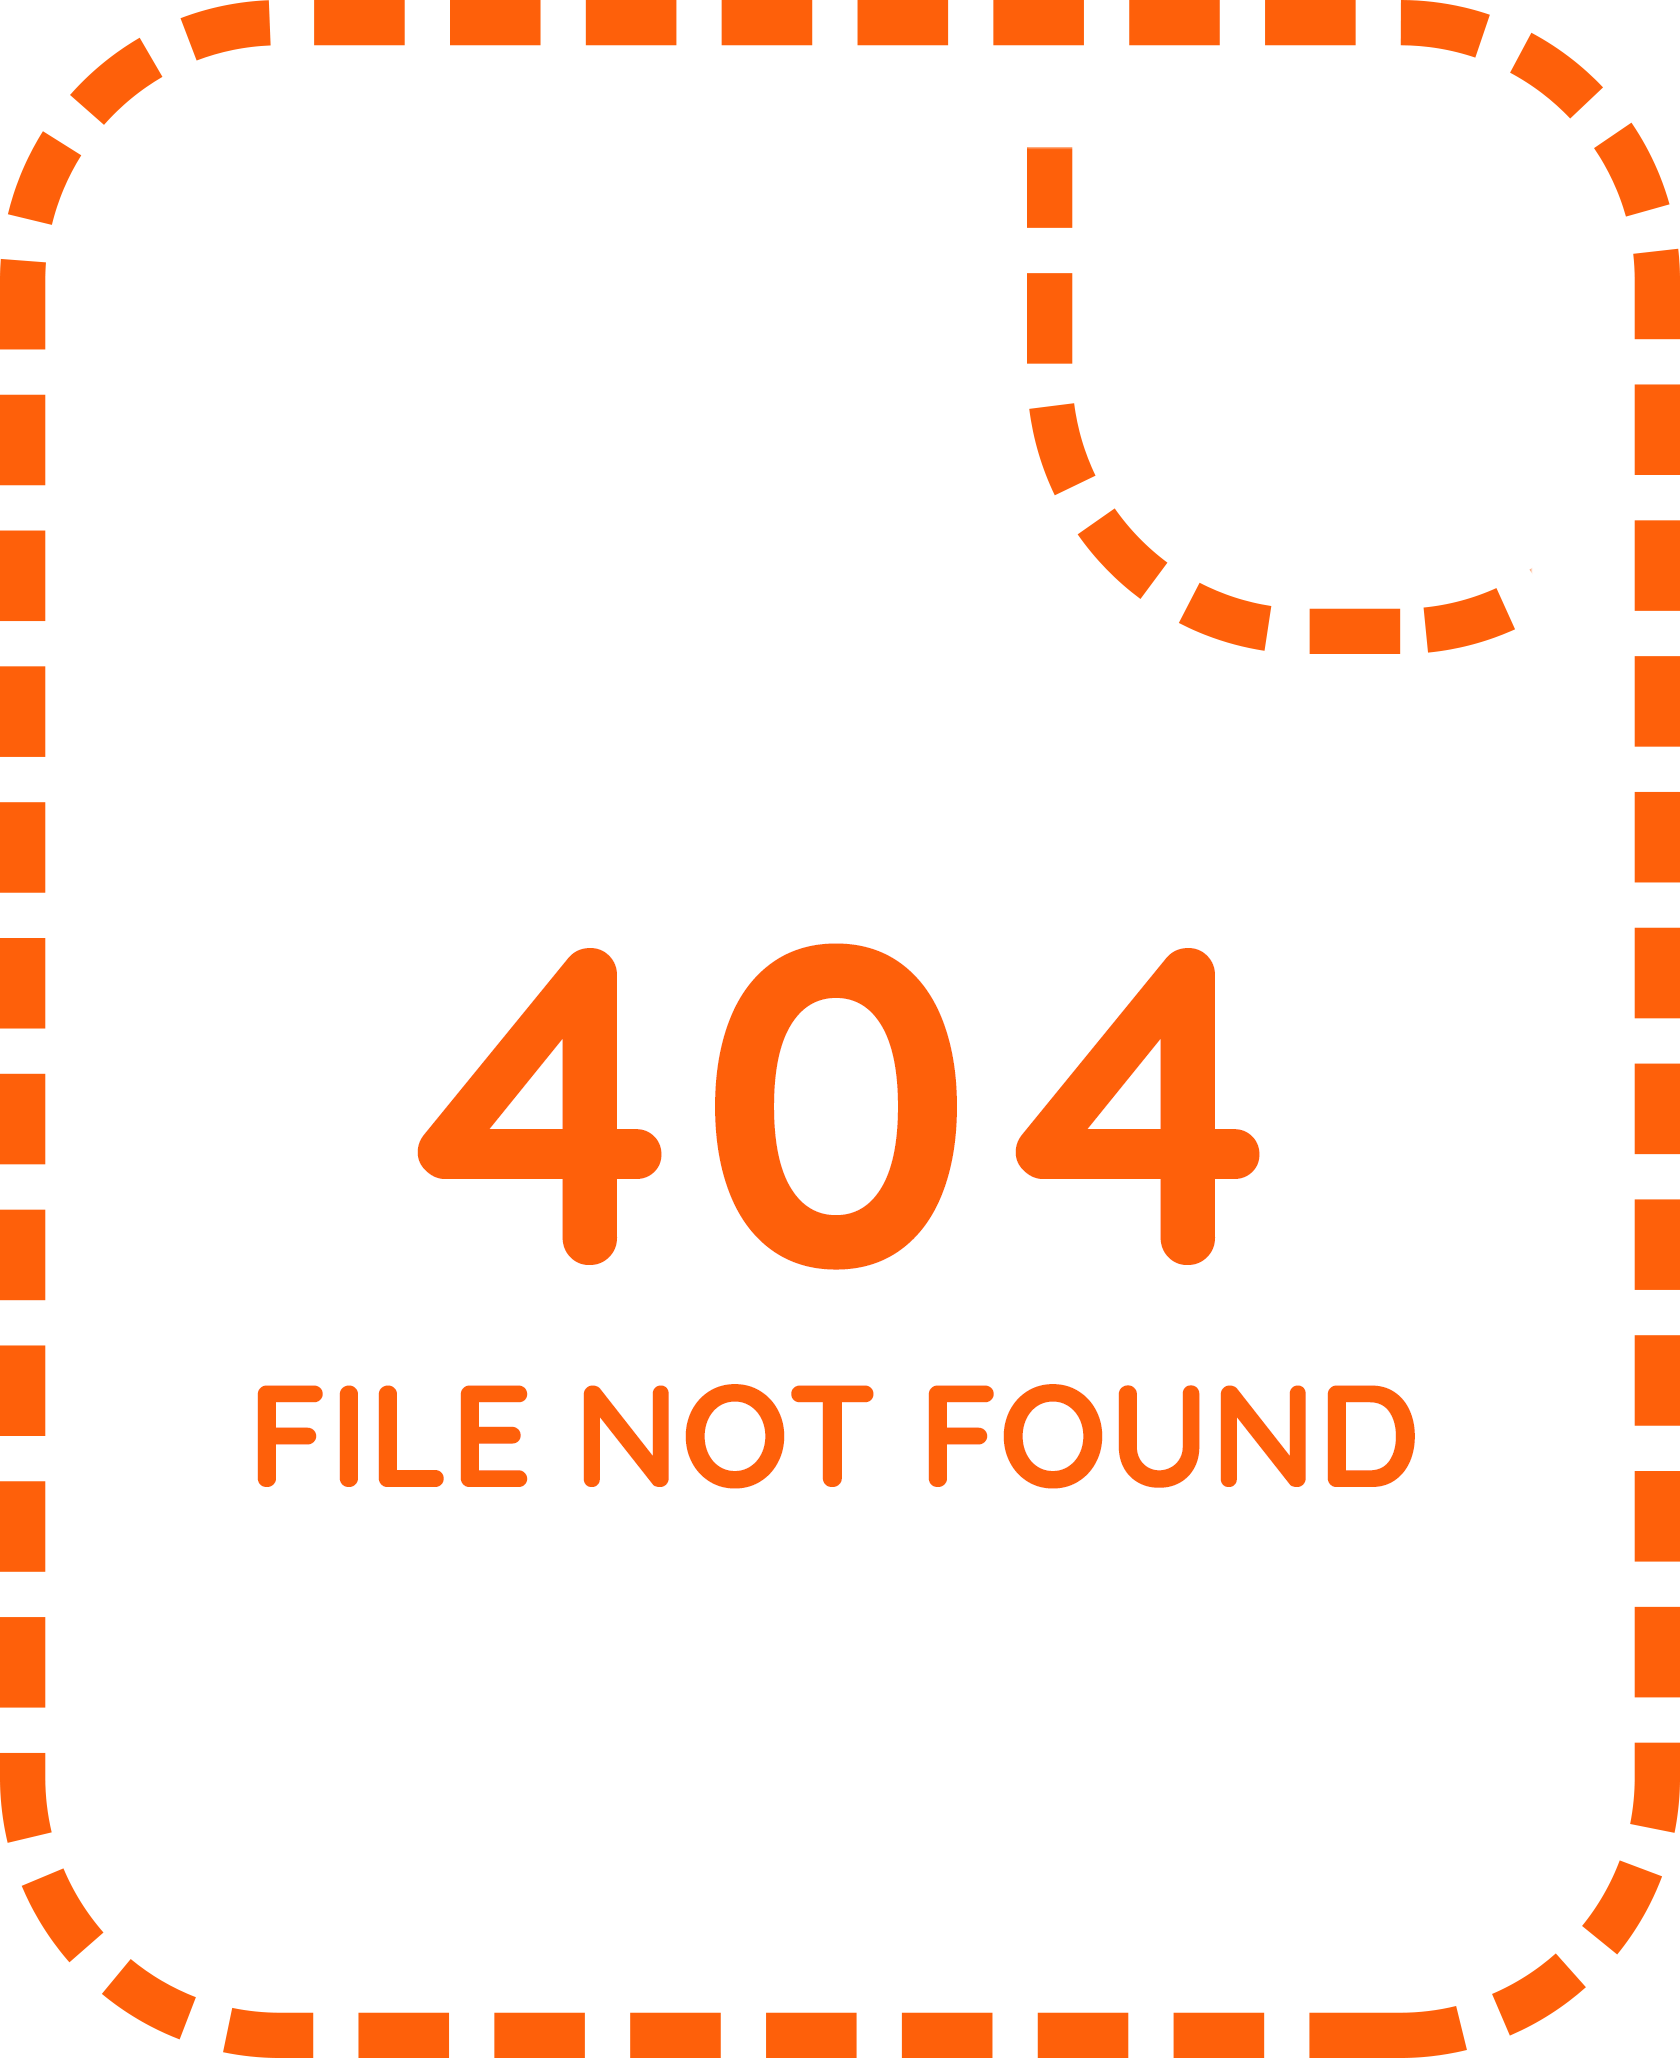 FILE NOT FOUND